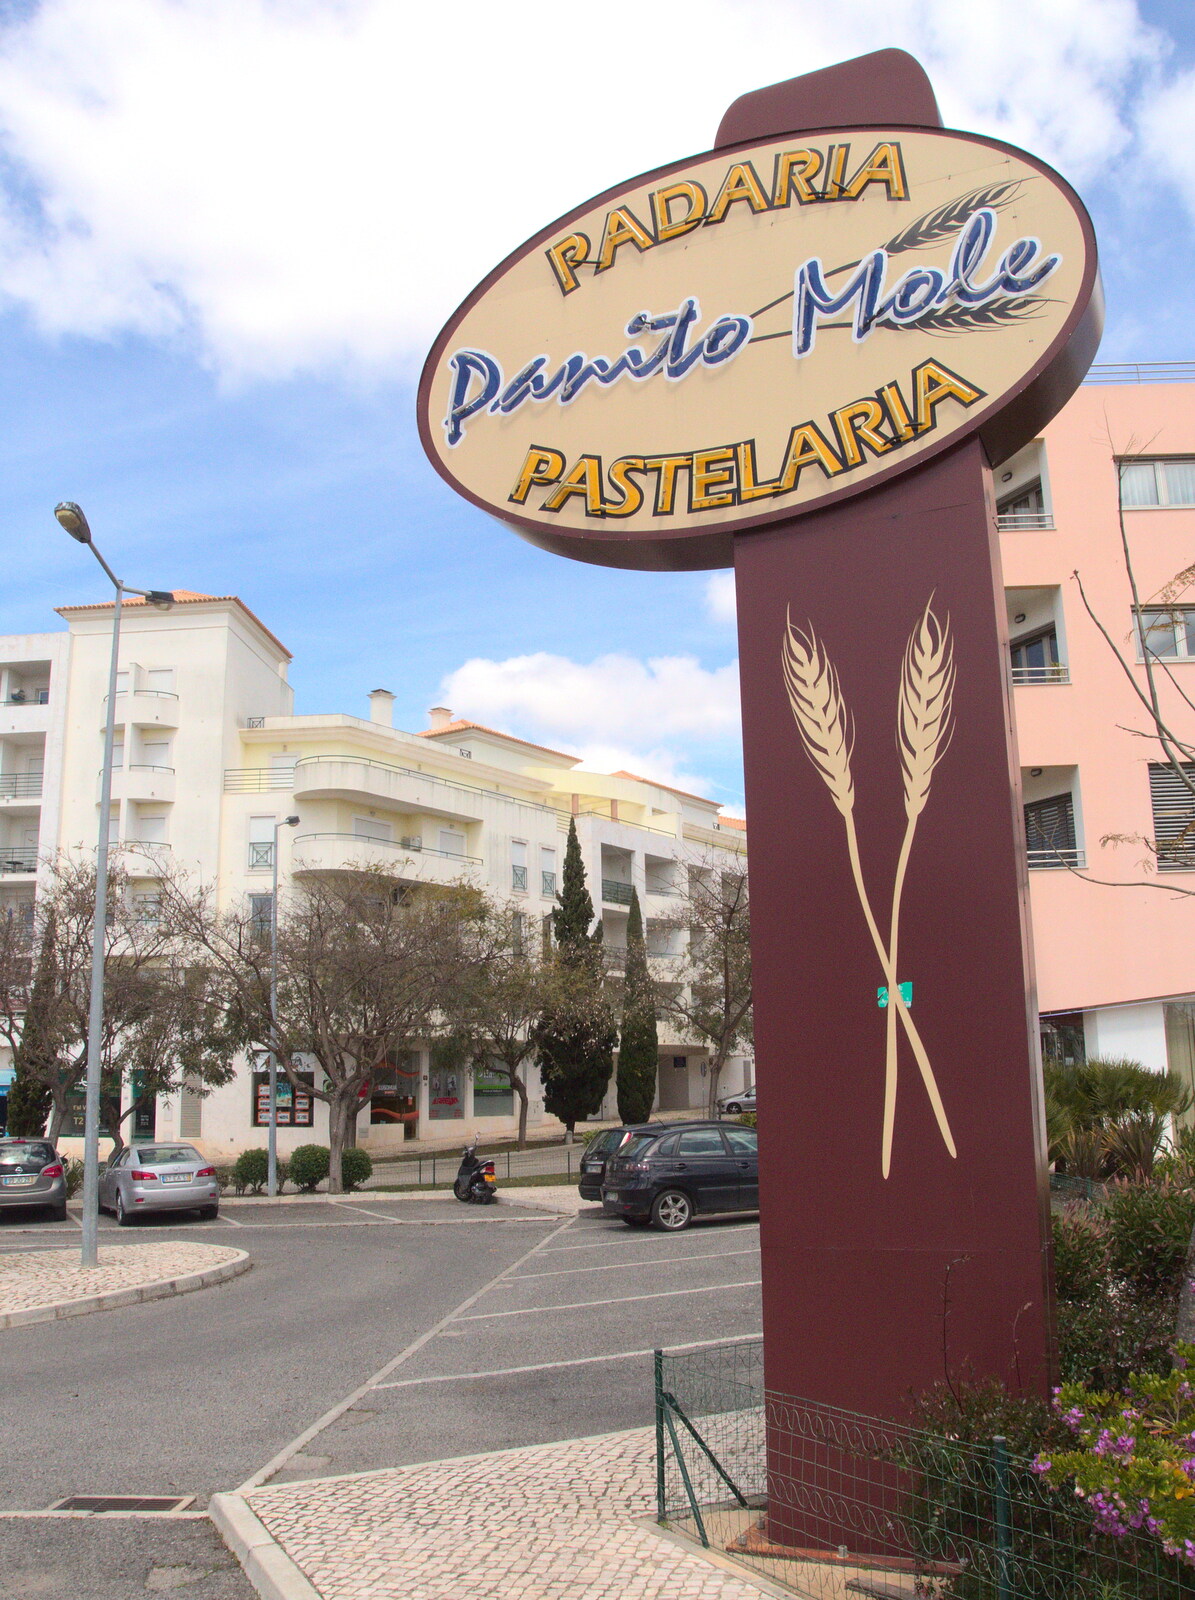 The Panito Mole sign from A Trip to Albufeira: The Hotel Paraiso, Portugal - 3rd April 2016